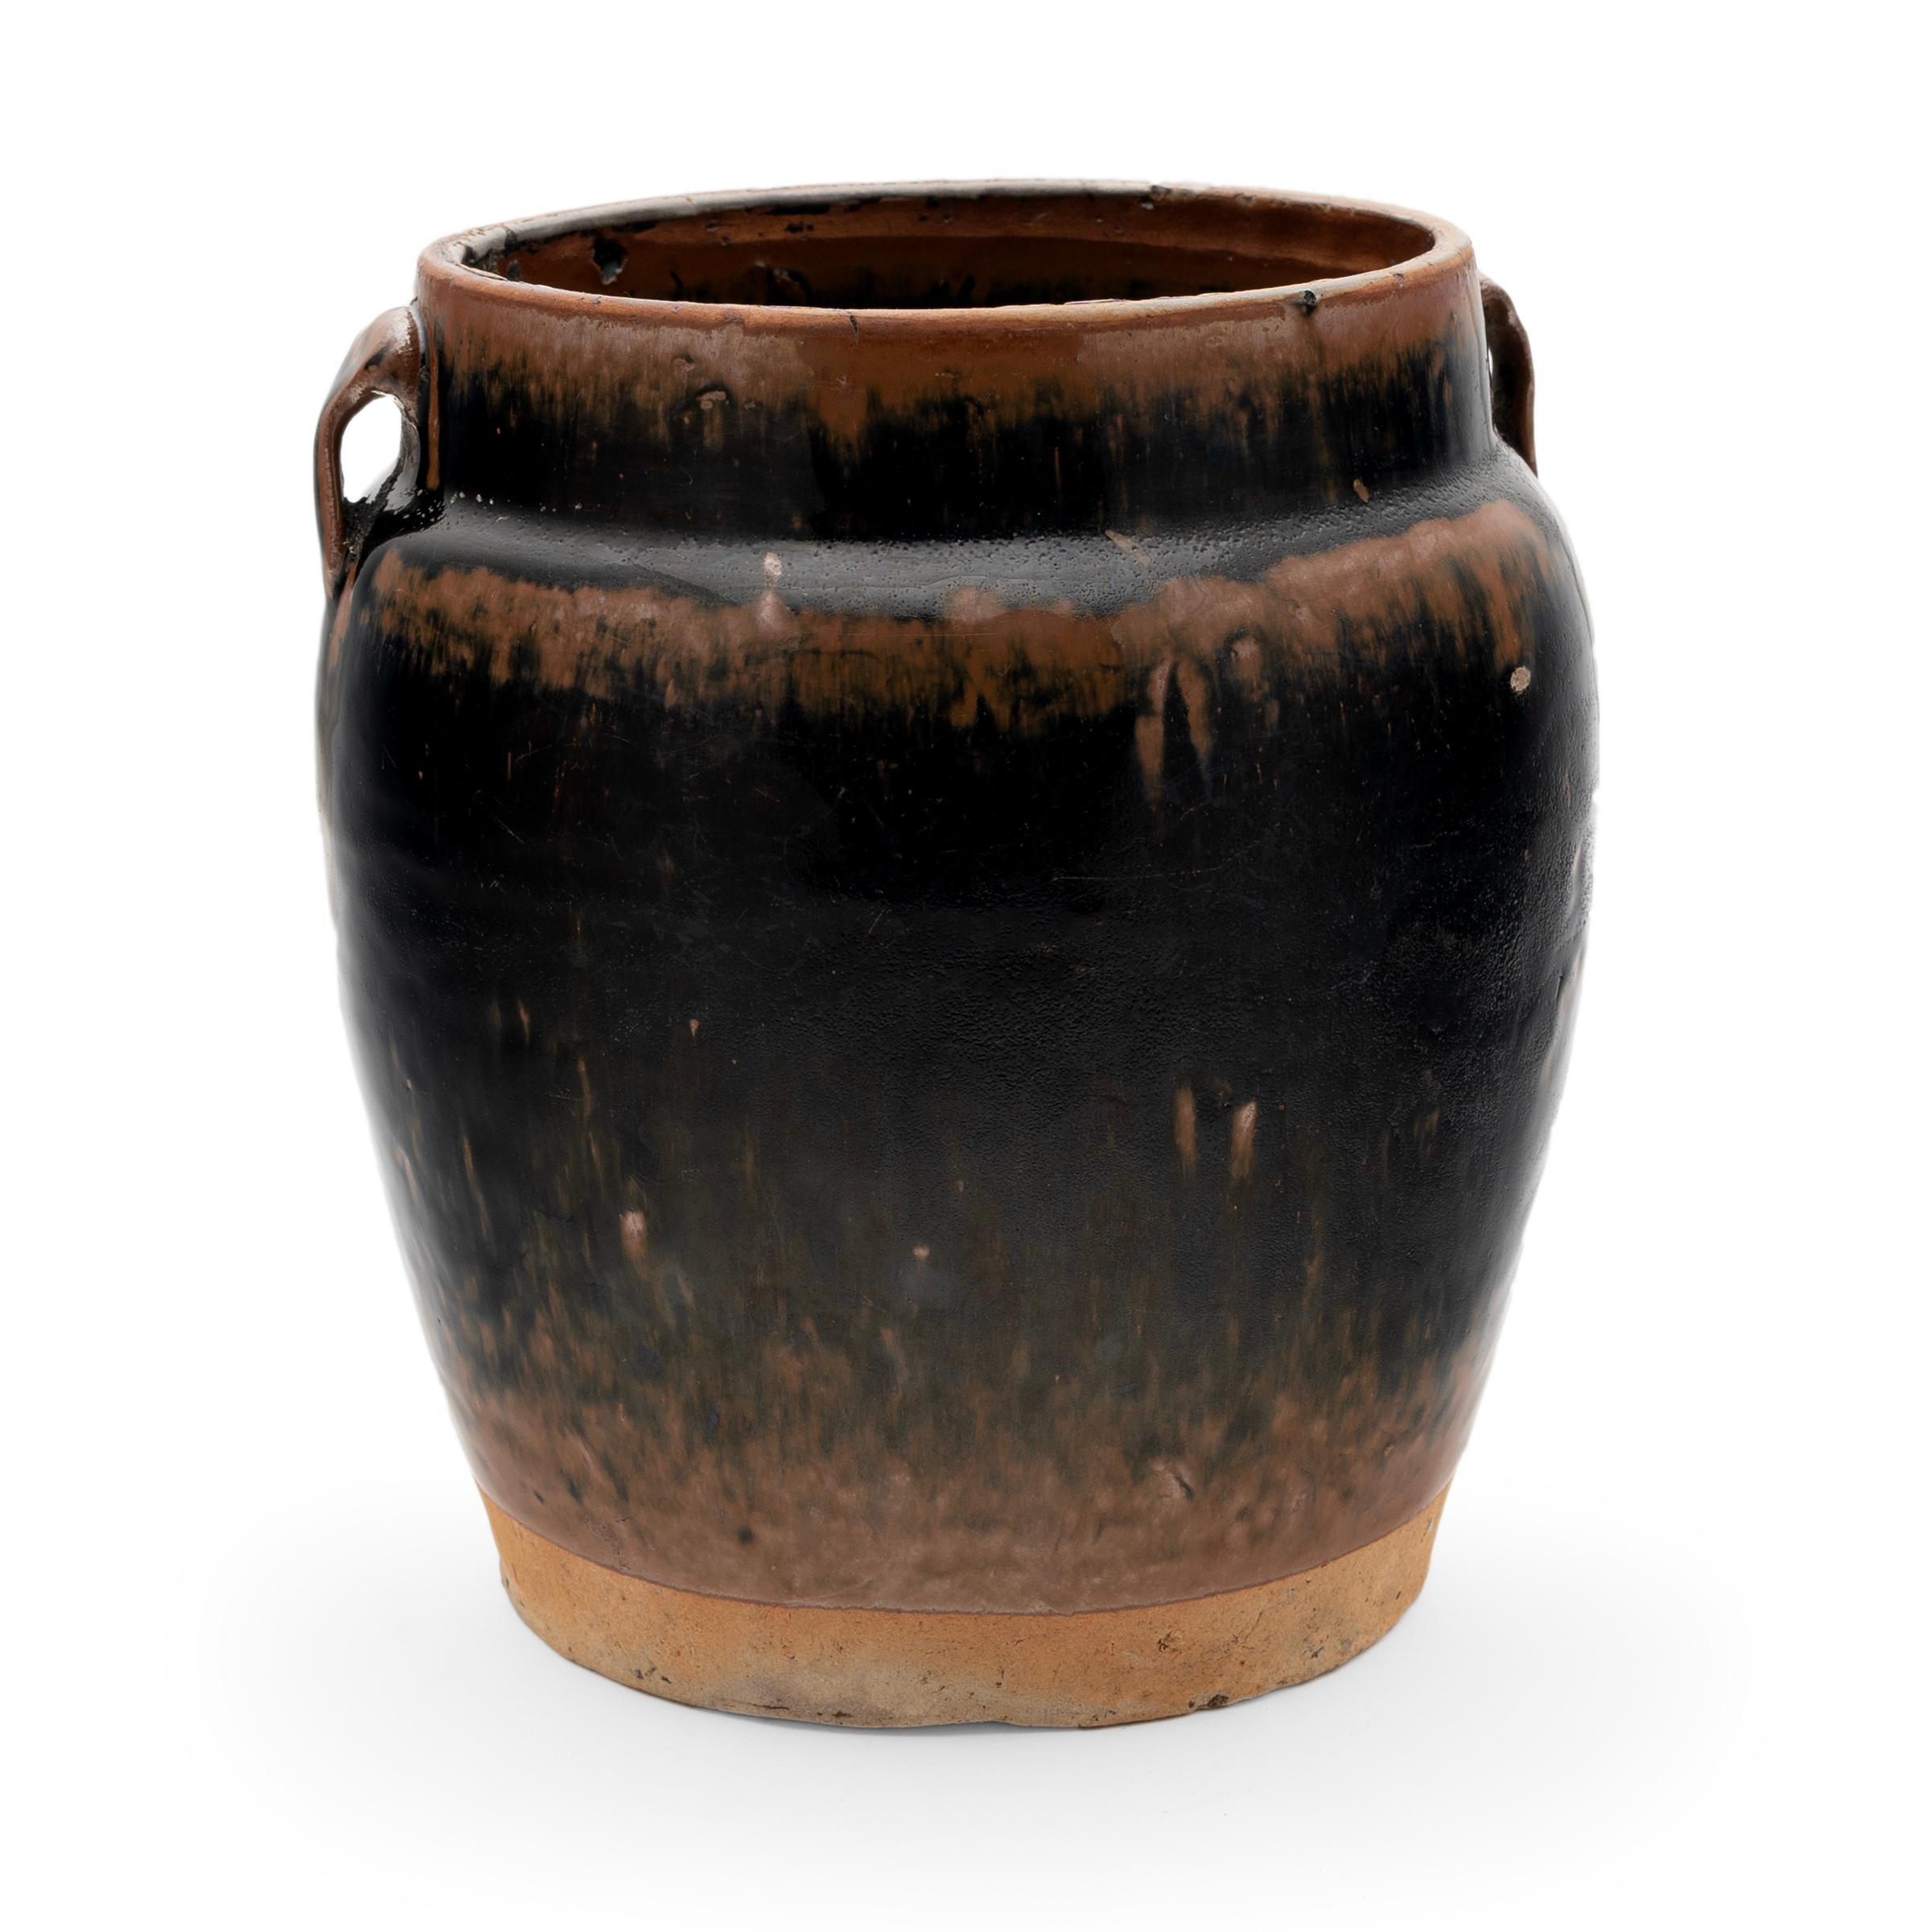 A thin dark glaze clings to the gentle swell of this 19th-century jar, exhibiting a rich range of tonal color. The wide-mouth jar was once used to store food or condiments in a Qing-dynasty kitchen, as evidenced by its interior glaze. Stopping short